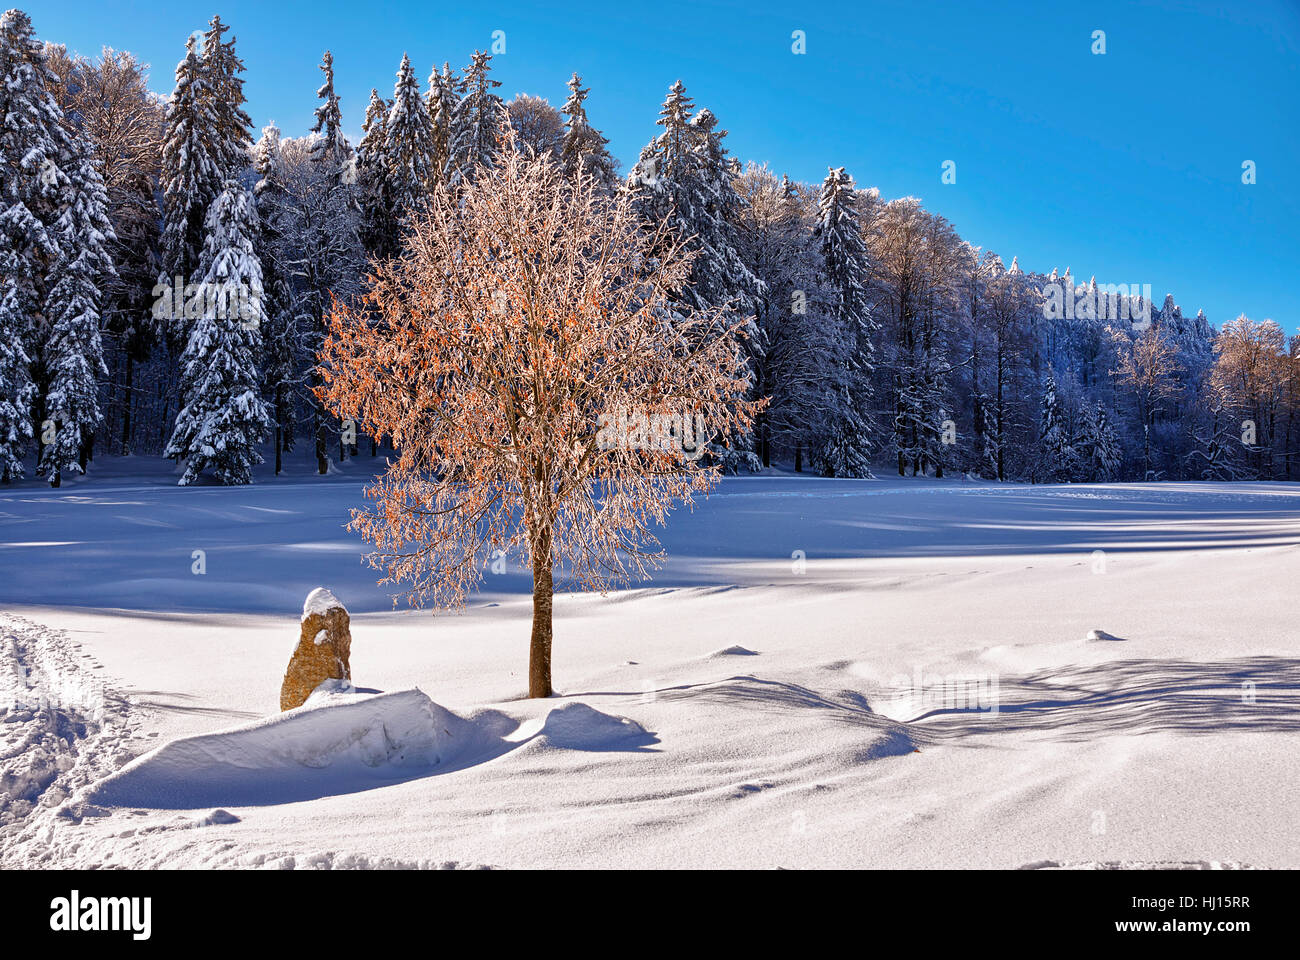 tree, winter, snow, forest, tree, winter, fir, pine, snow, forest, willow, Stock Photo